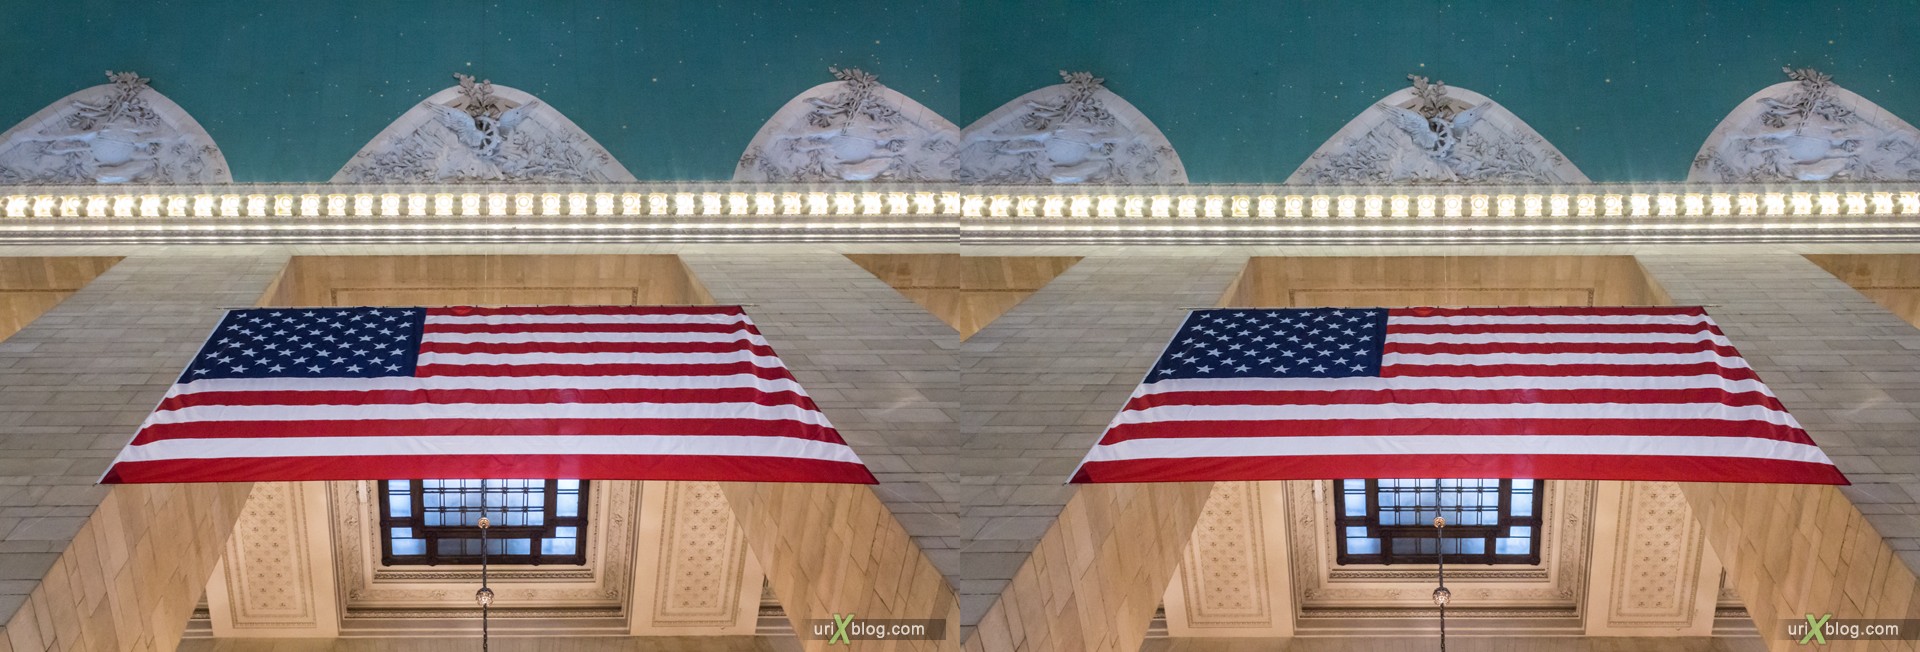 2013, Grand Central Terminal, NYC, New York City, USA, 3D, stereo pair, cross-eyed, crossview, cross view stereo pair, stereoscopic